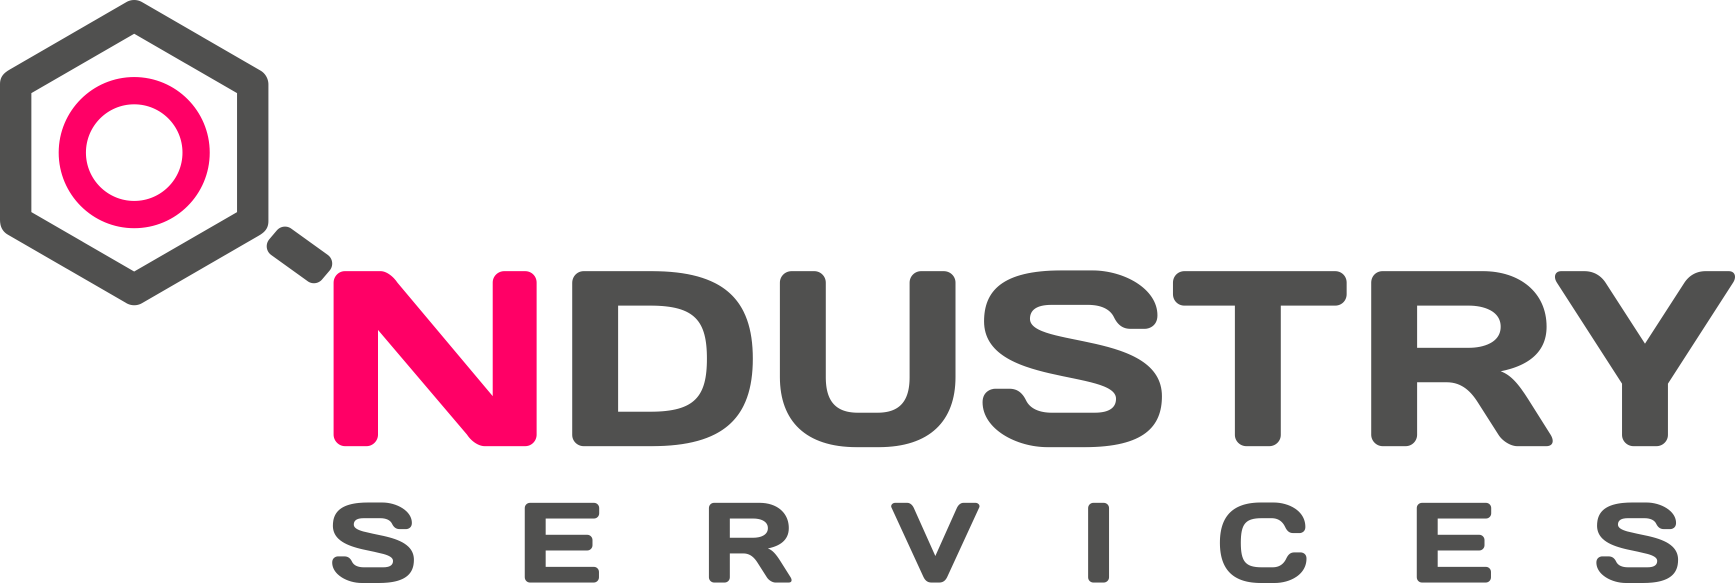 Ndustry Services